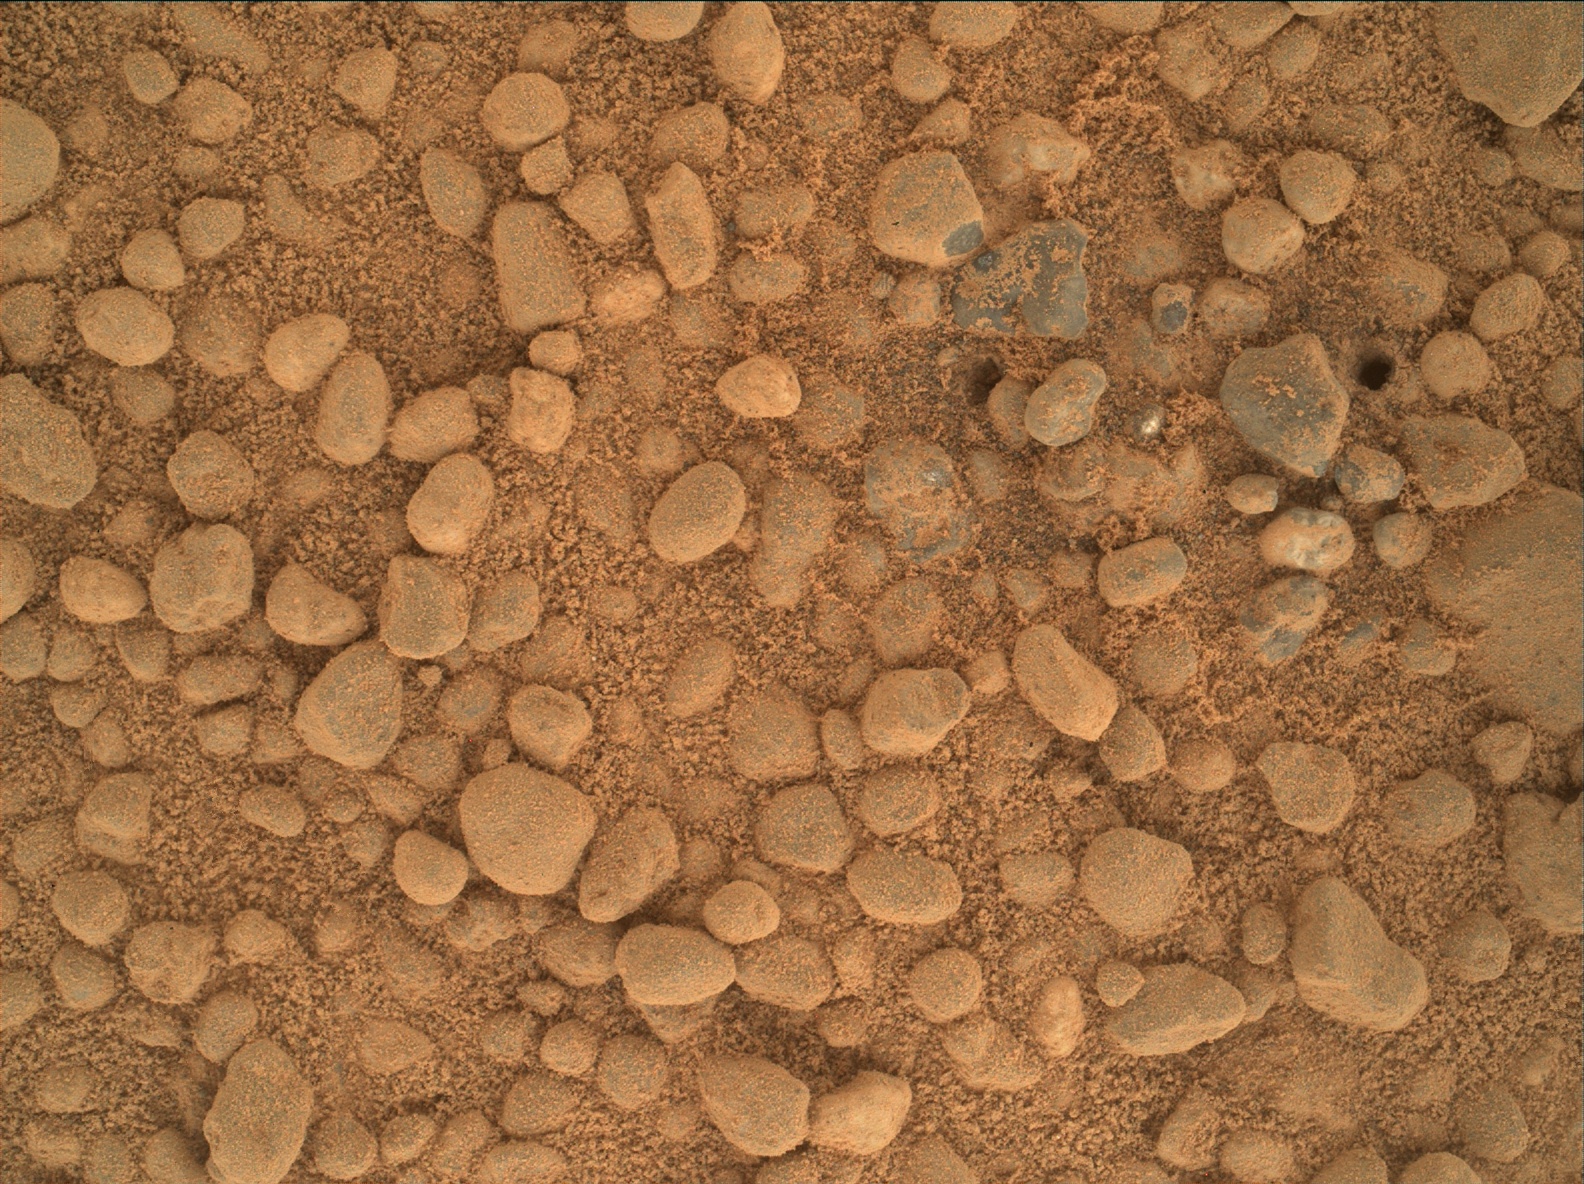 Nasa's Mars rover Curiosity acquired this image using its Mars Hand Lens Imager (MAHLI) on Sol 373